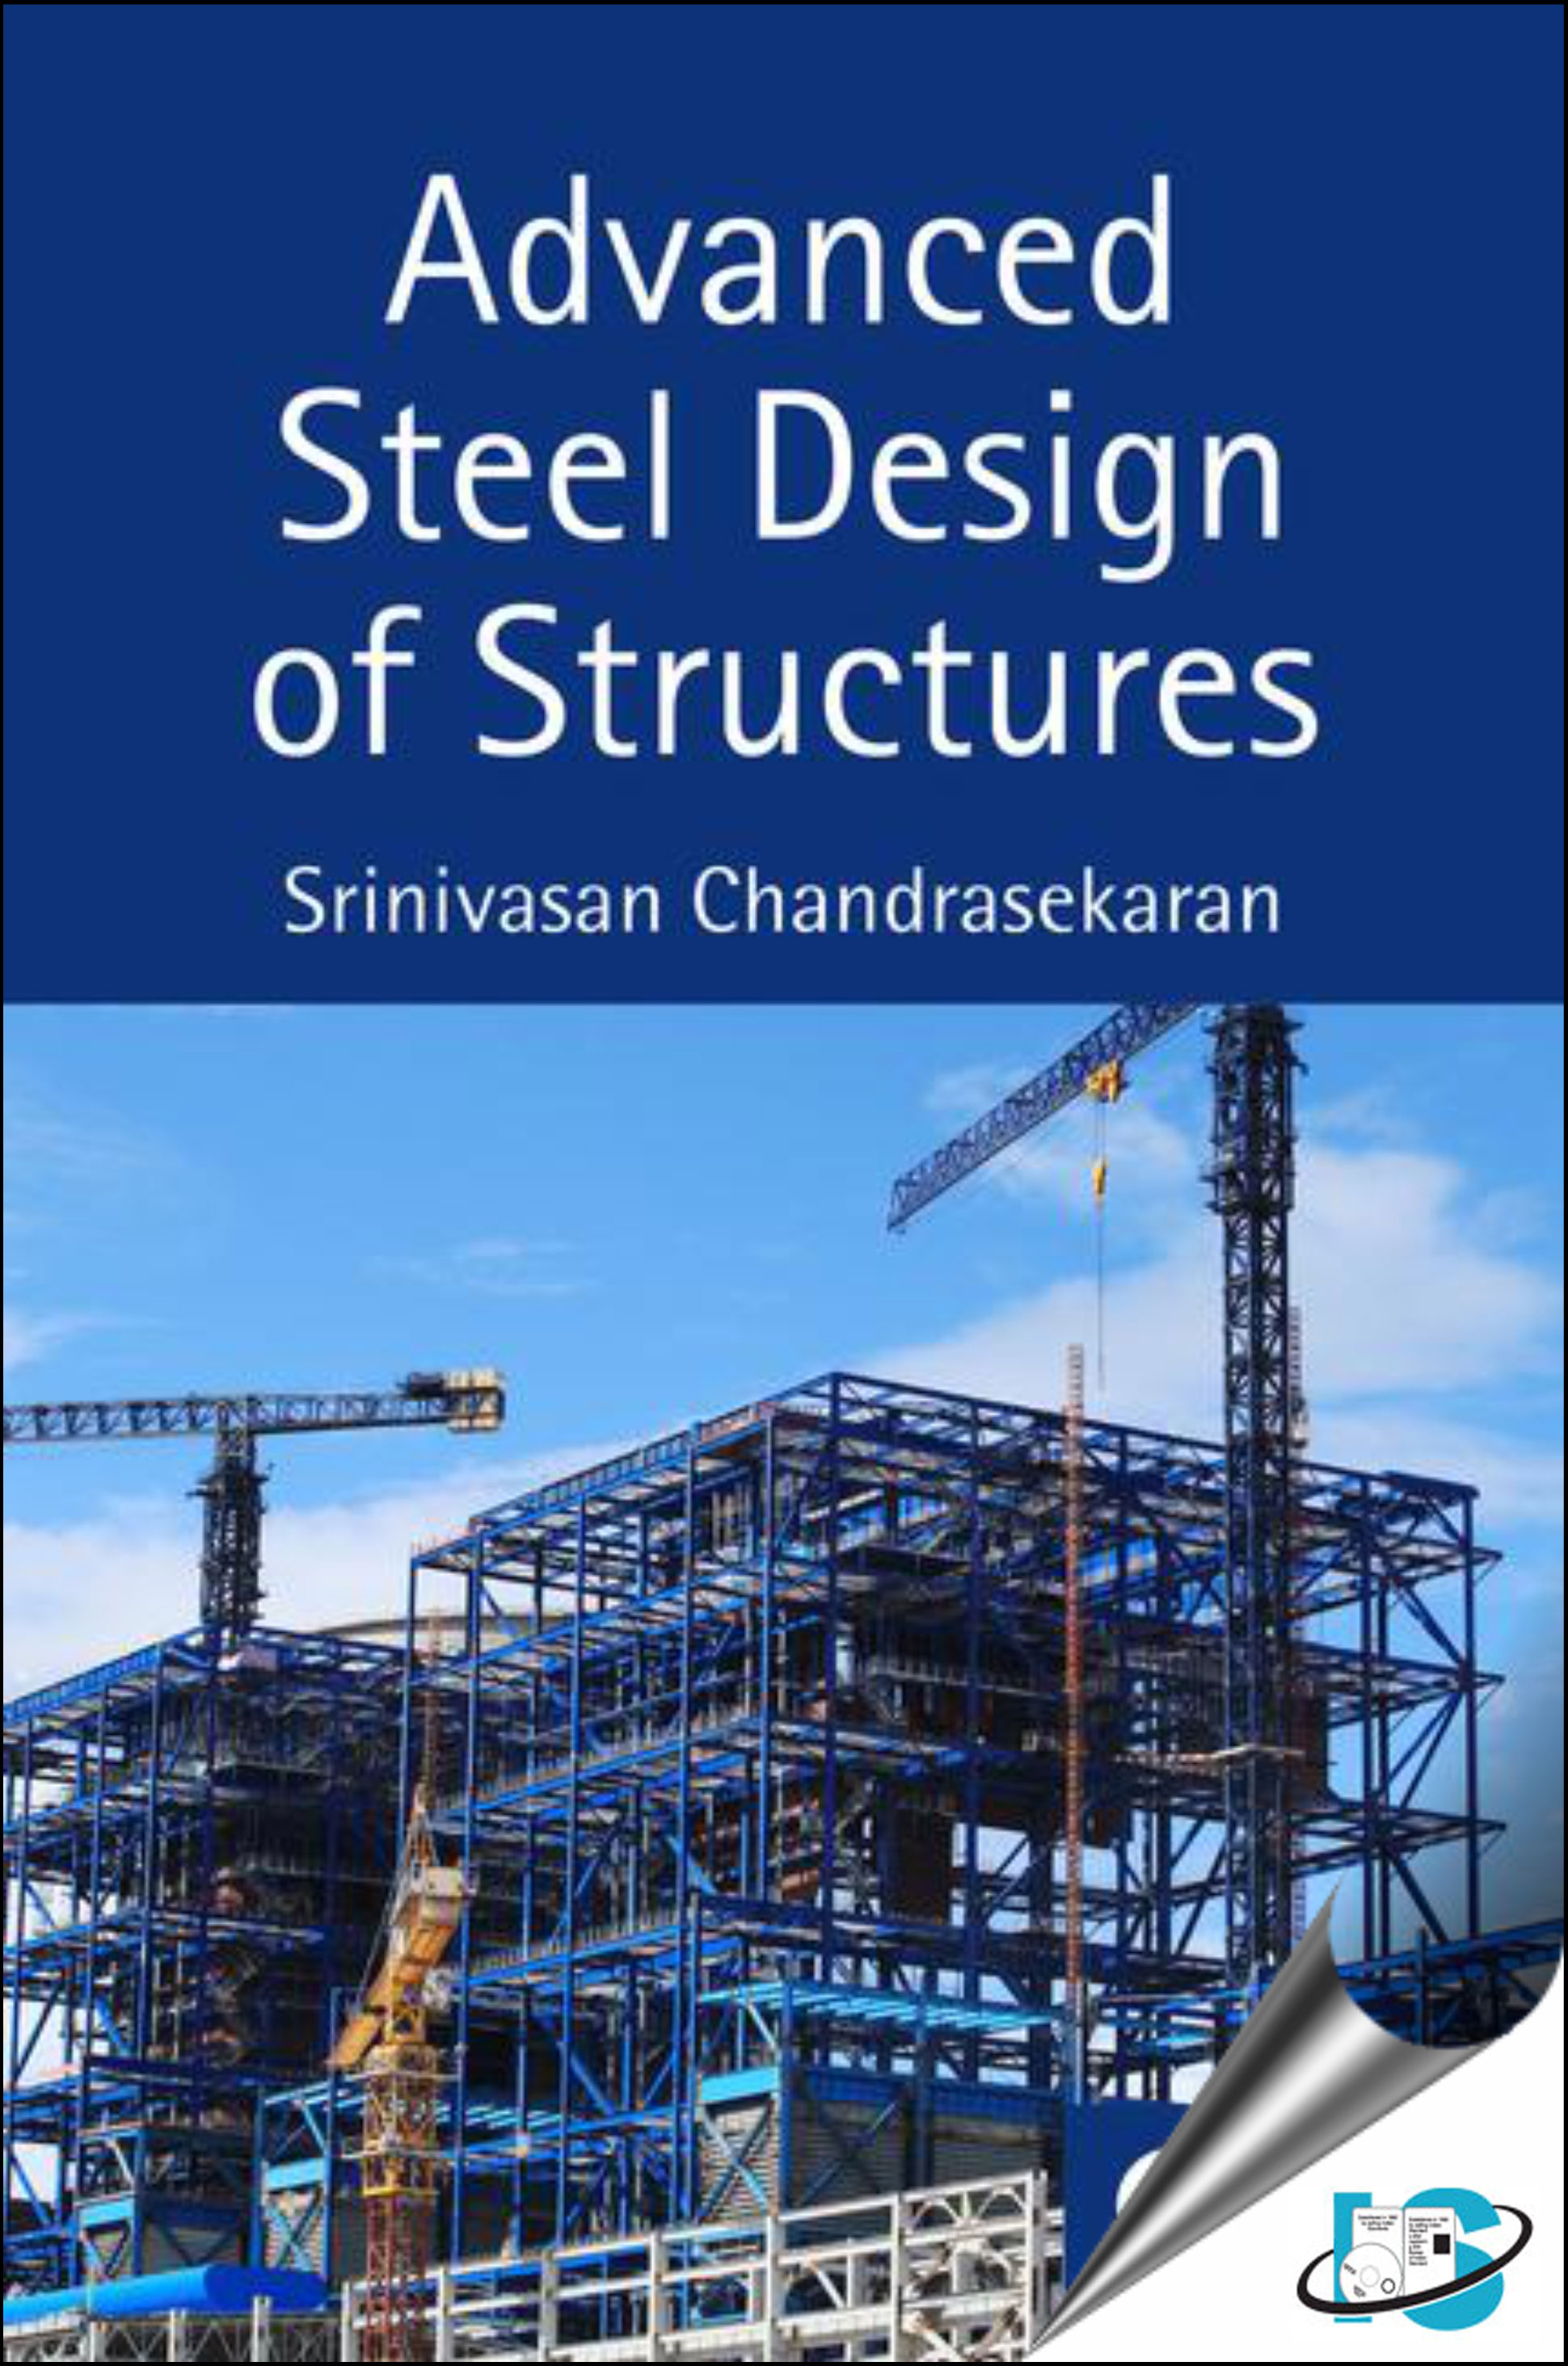 Crc press. Structural Engineering and Design.